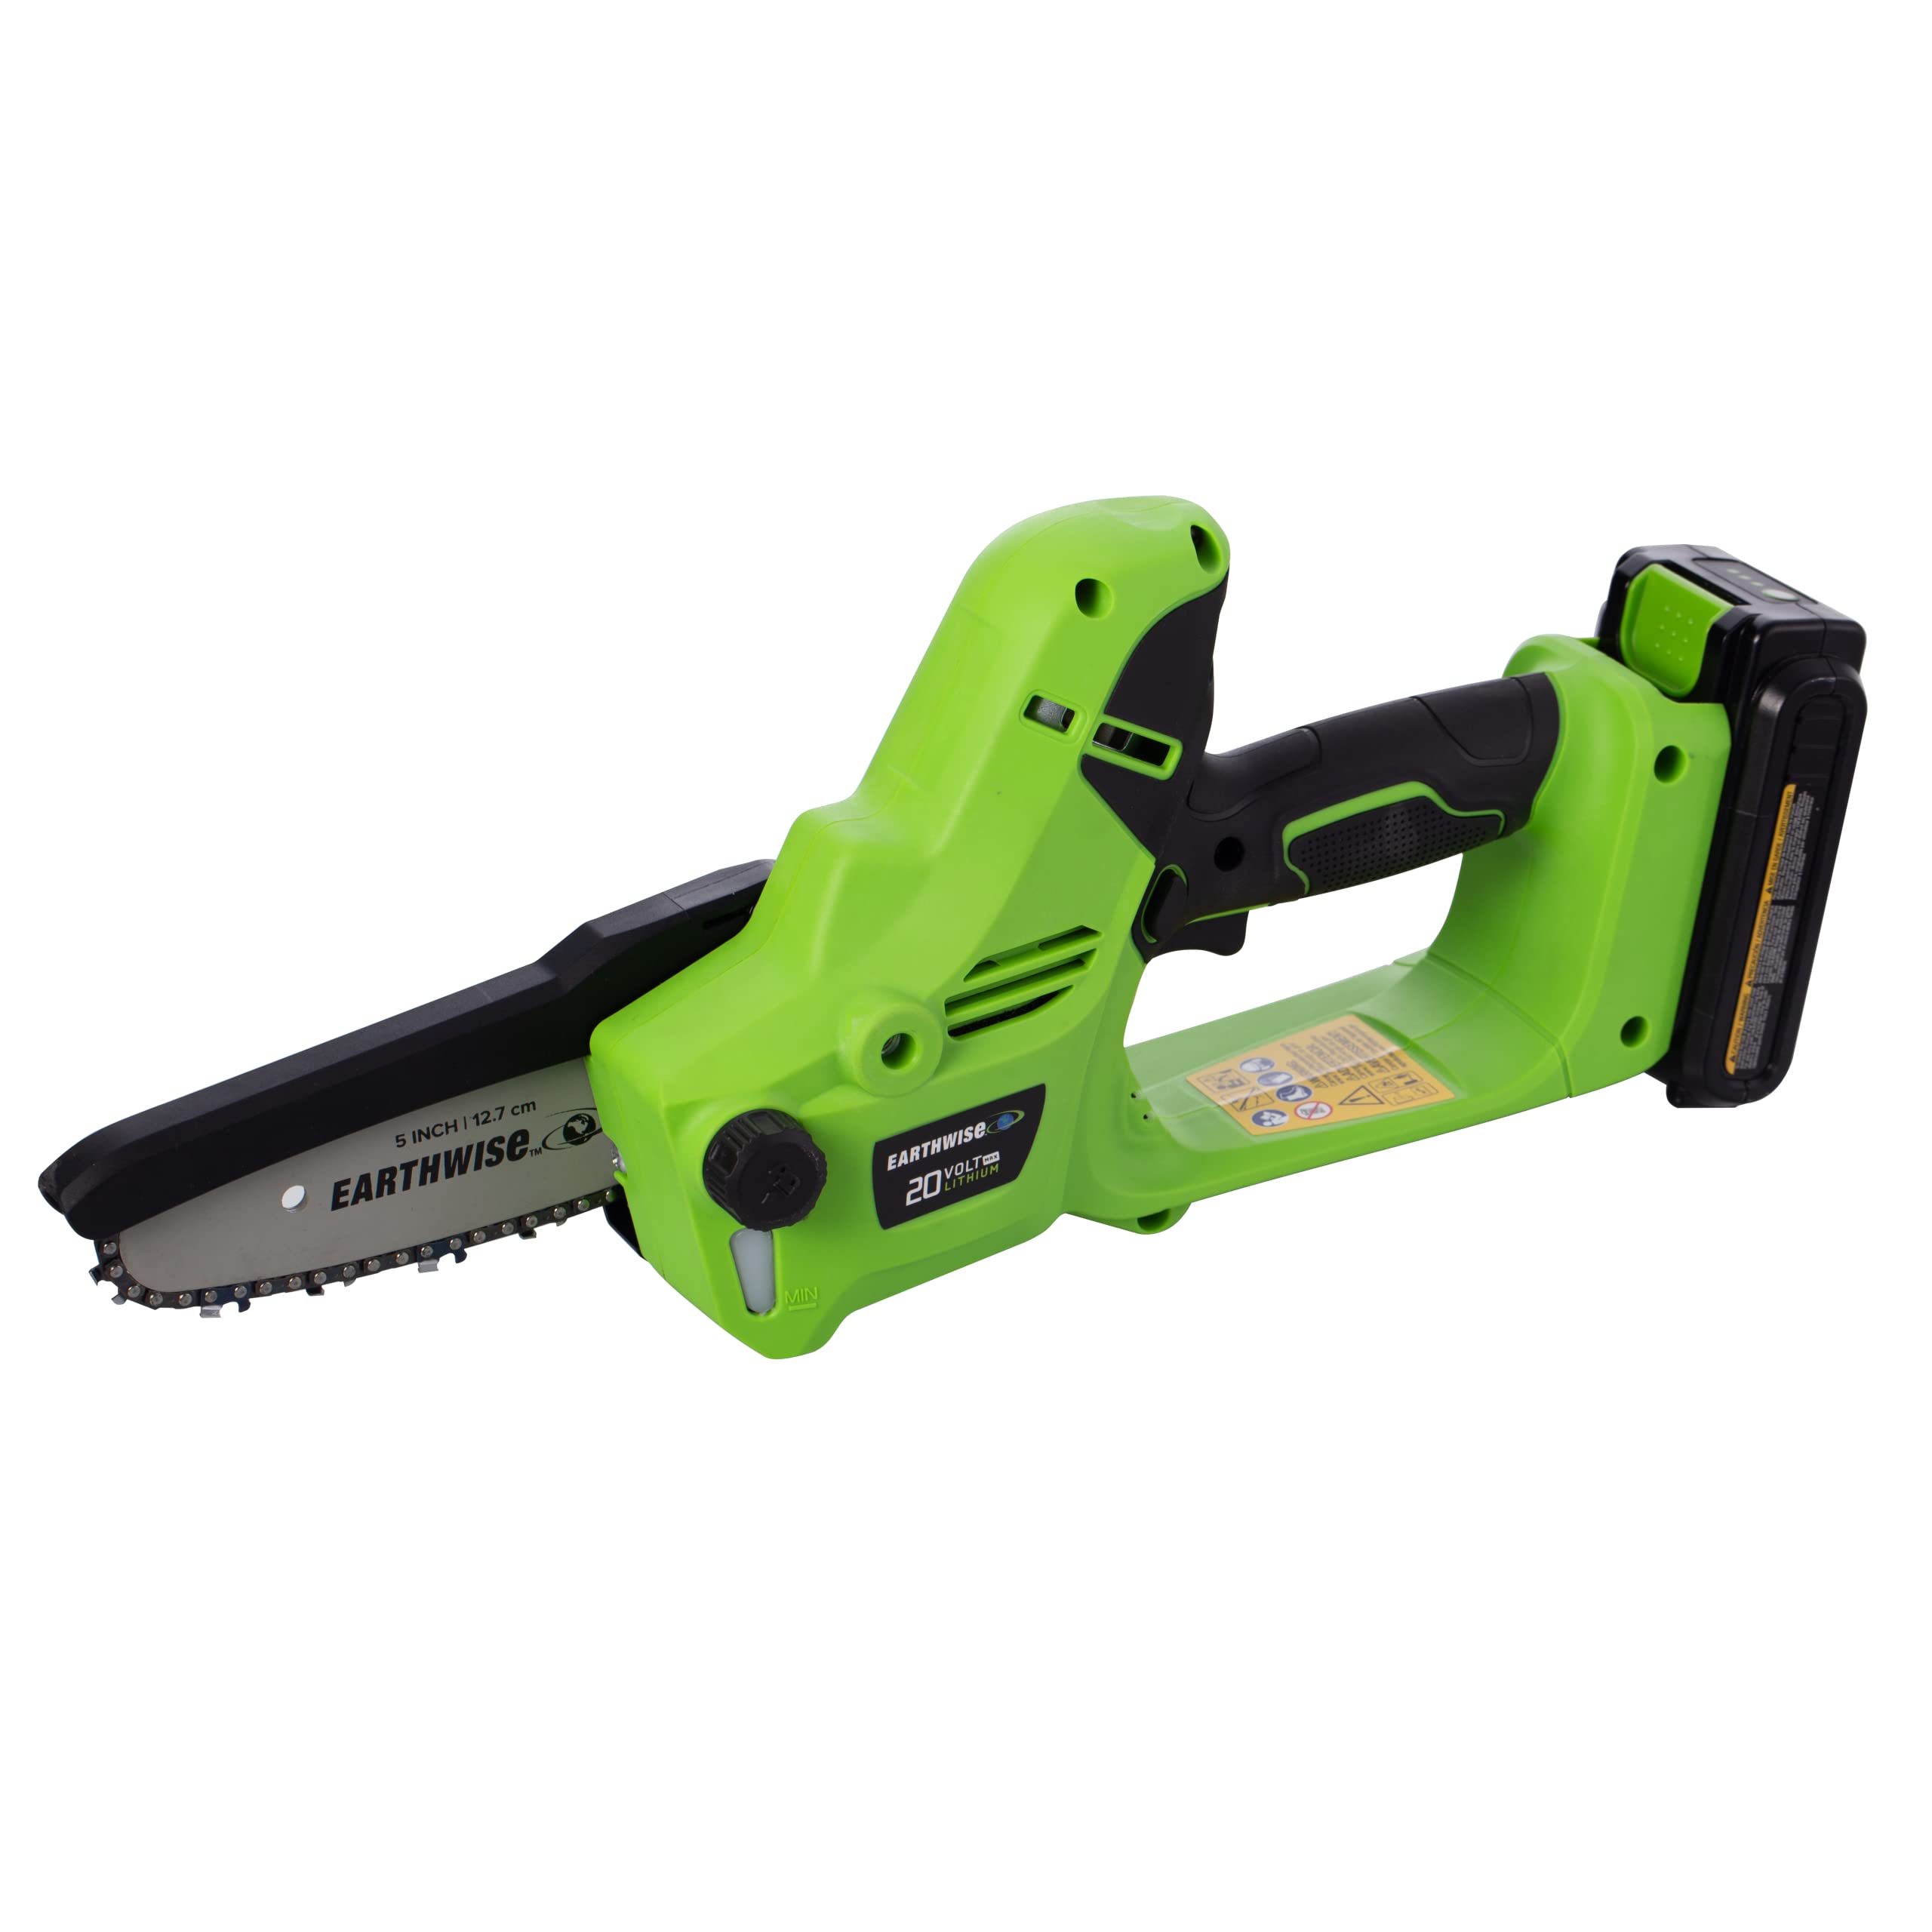 Earthwise Power Tools LCS0520 20-Volt 5inch Mini Pruning Saw w/ 2.0Ah Battery